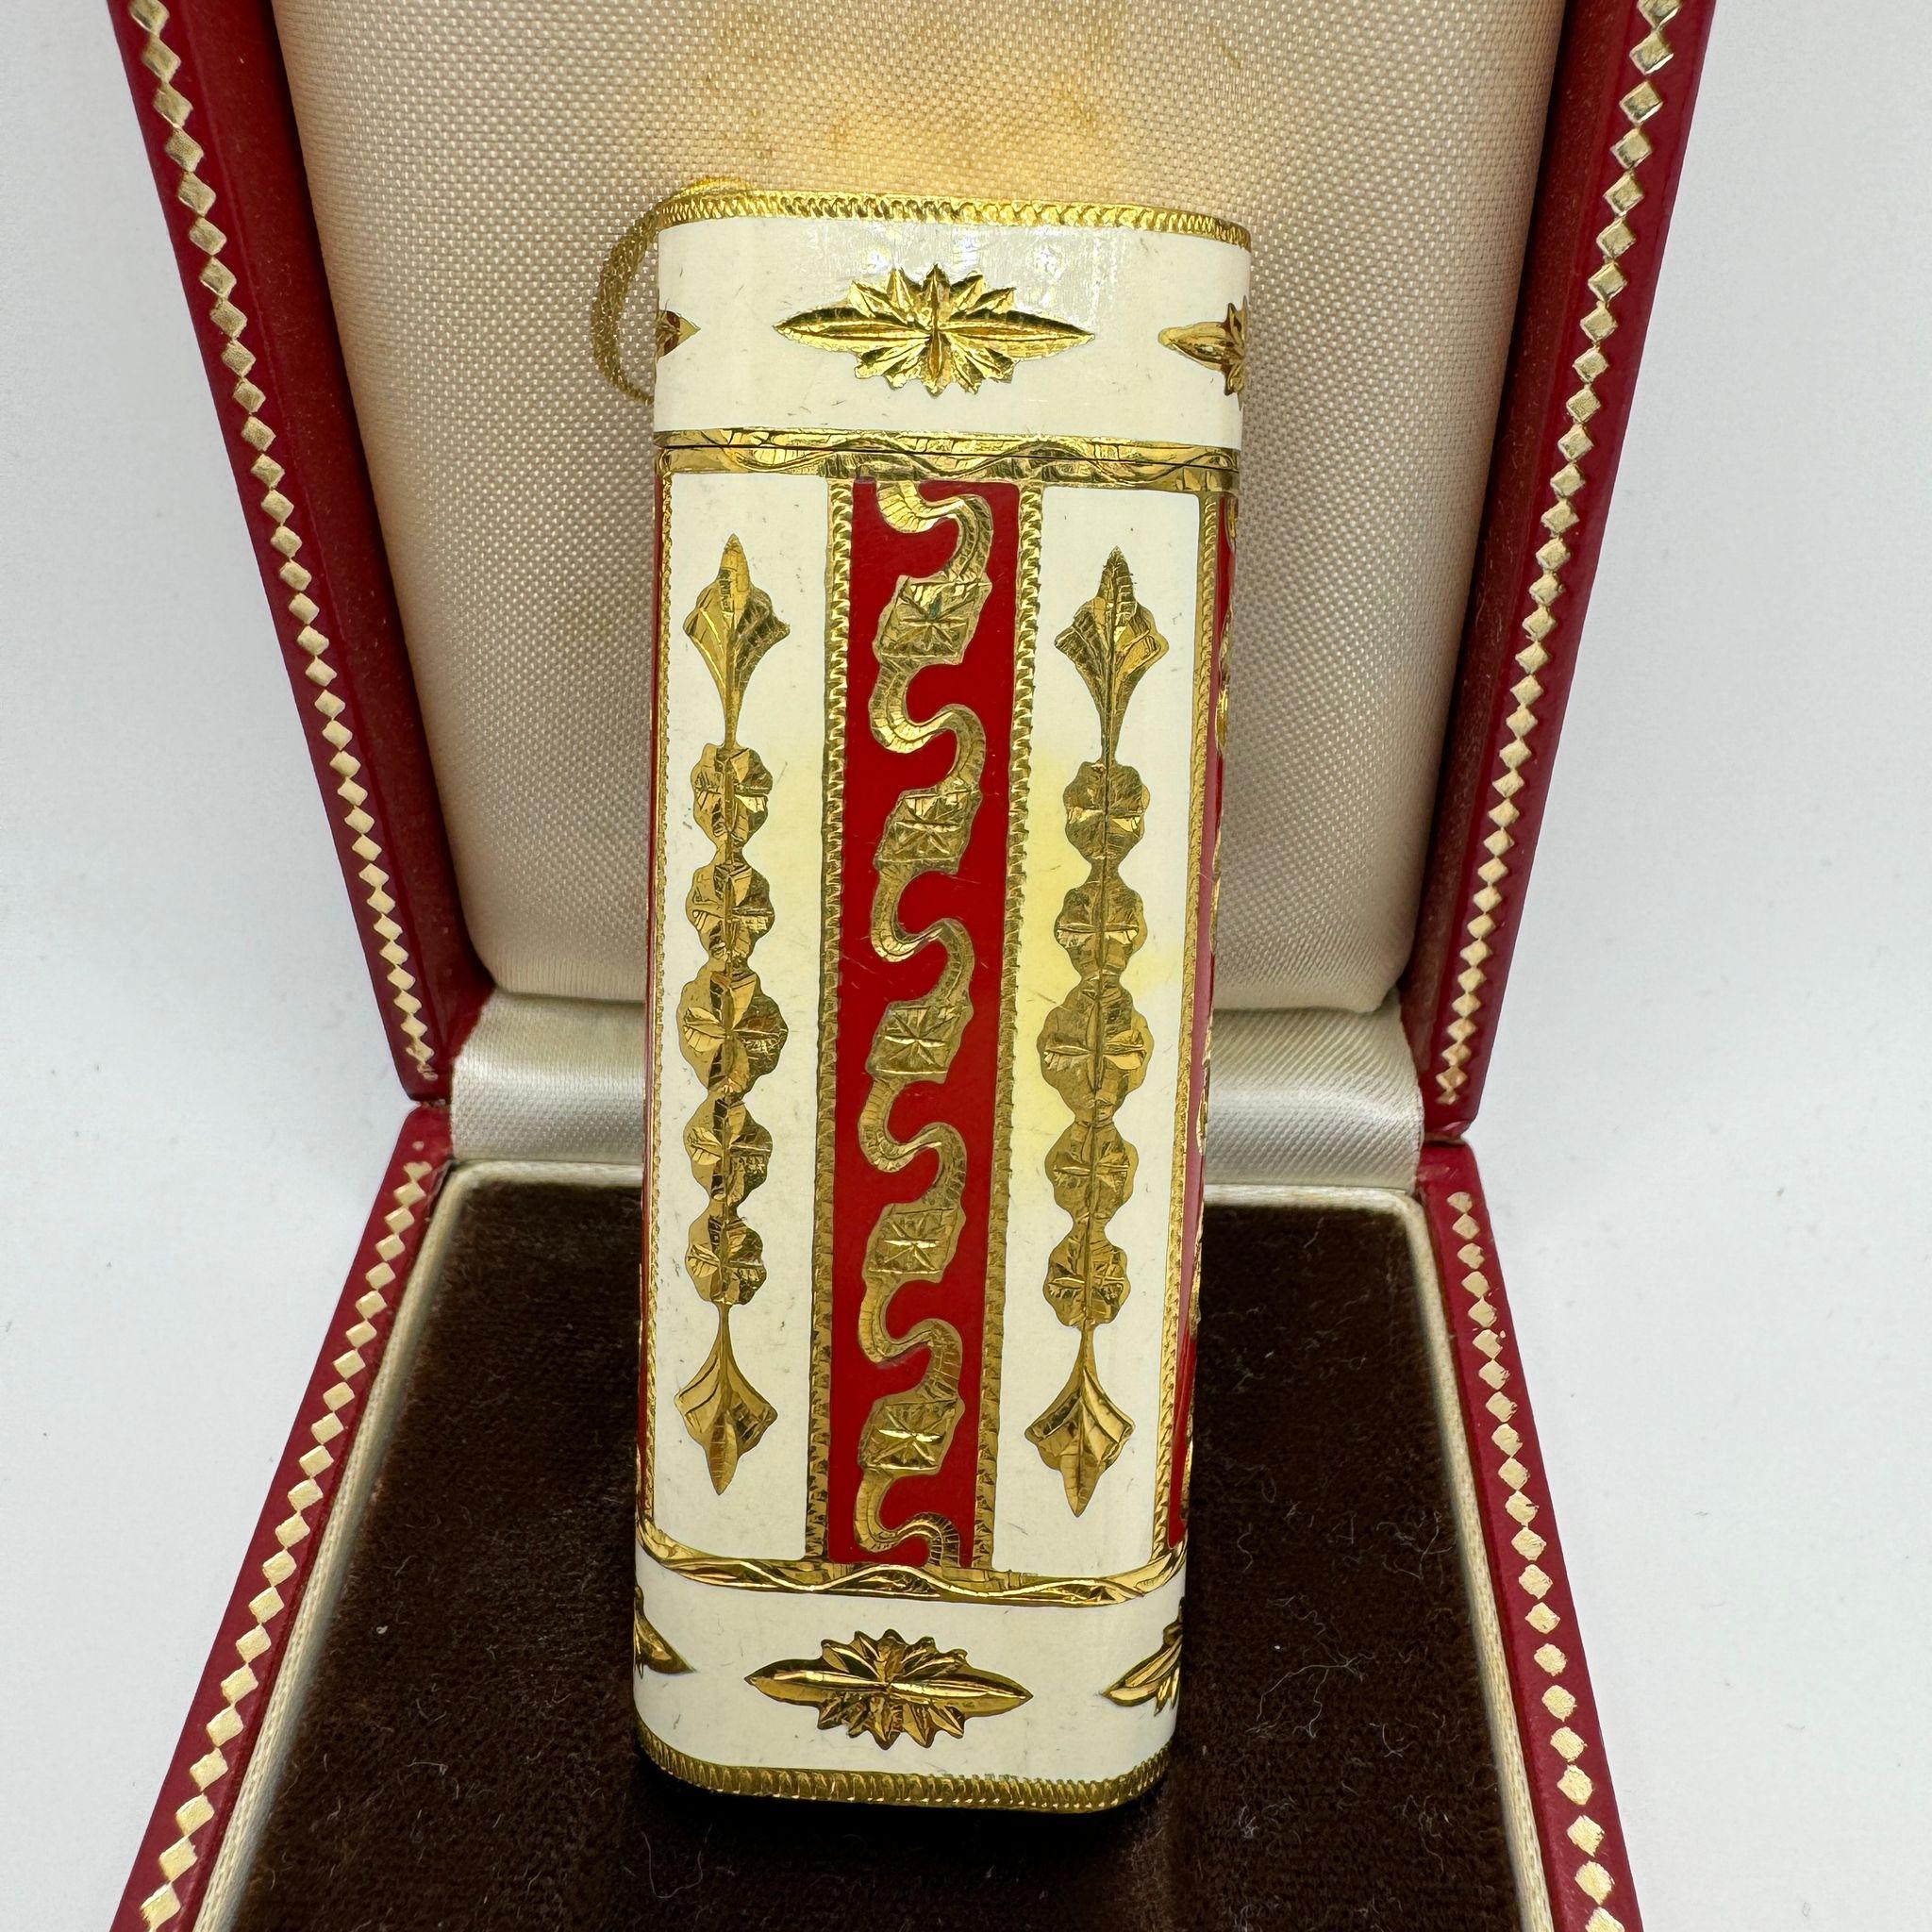 Le Must de Cartier Very Rare Royking Lighter, 18k Gold Plating & Enamel Inlay 
Cream and red color 
Cartier “Royking” lighter.
Circe 1970
CARTIER  Roy King Rollagas, a Unique RARE example of a ROYKING designed Cartier Rollagas lighter made circa